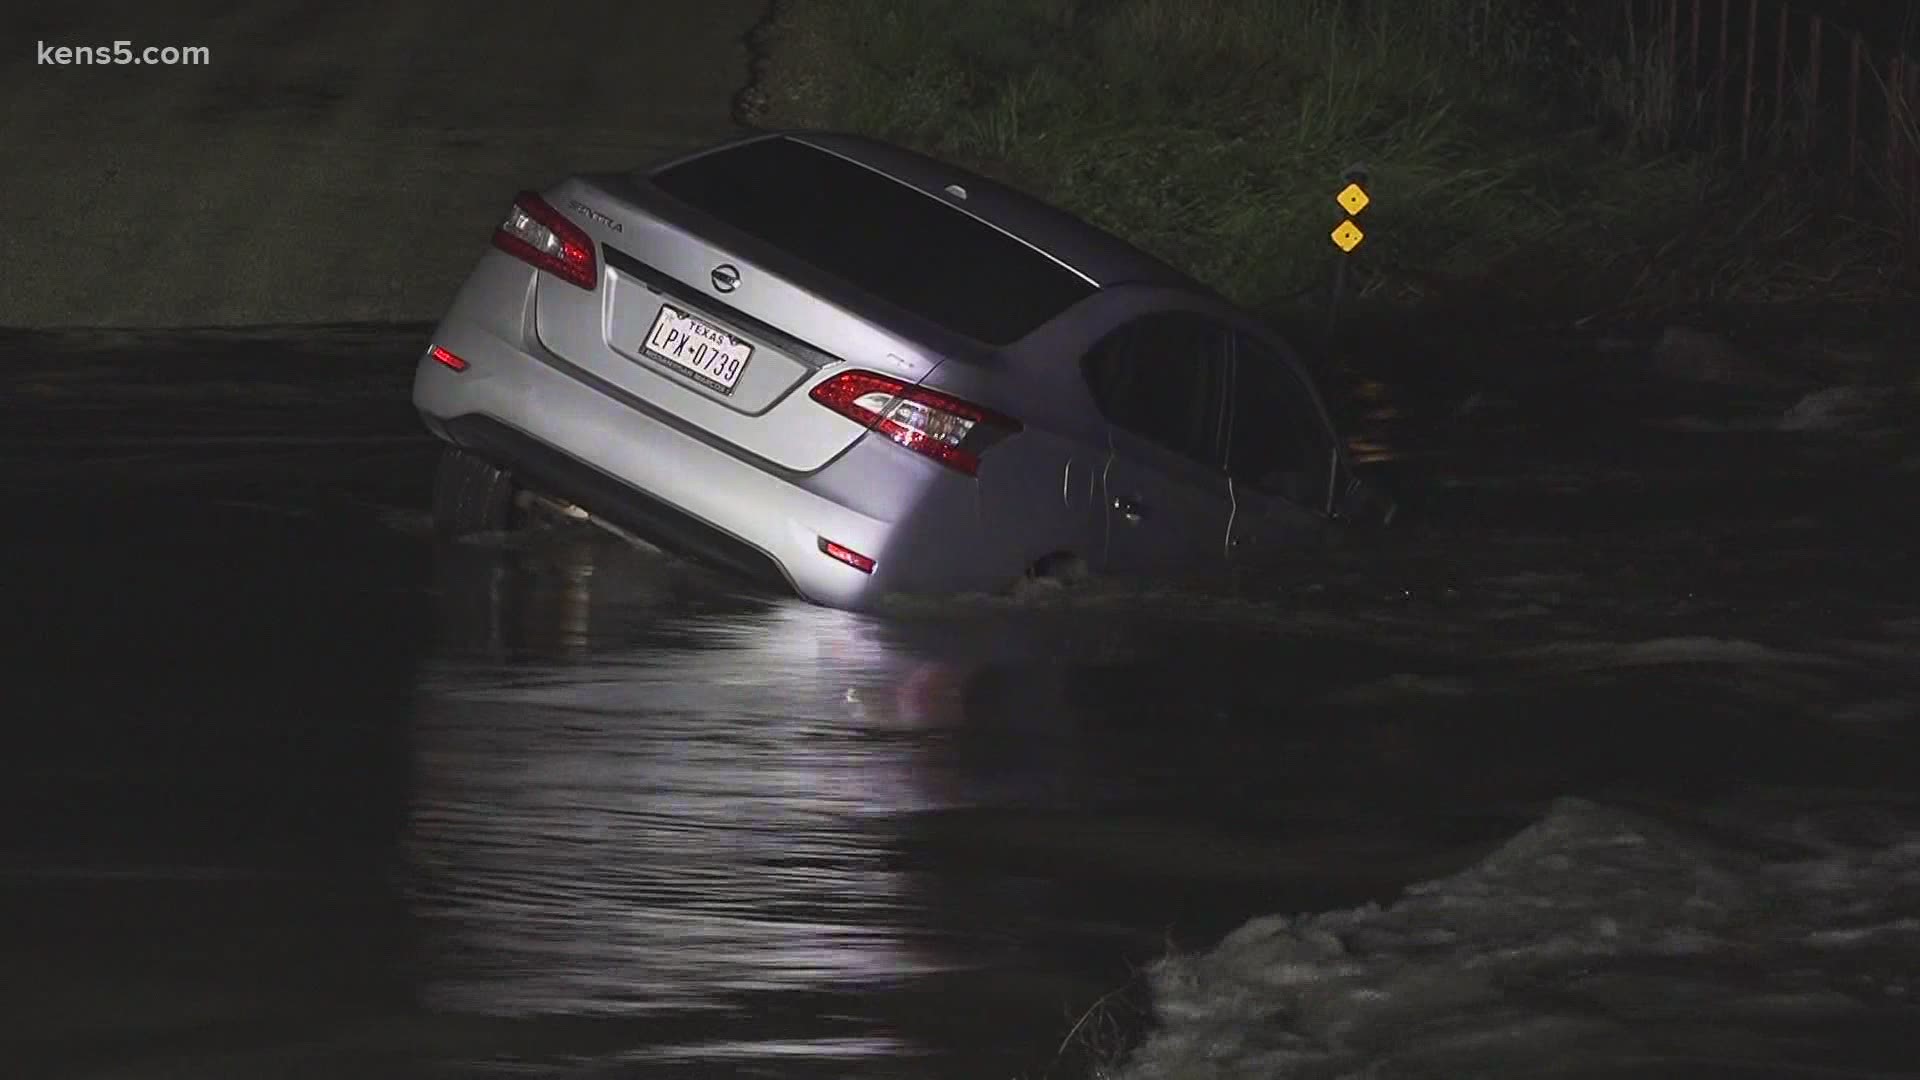 SAFD had to move quickly because they were afraid the car would be swept away by floodwaters.